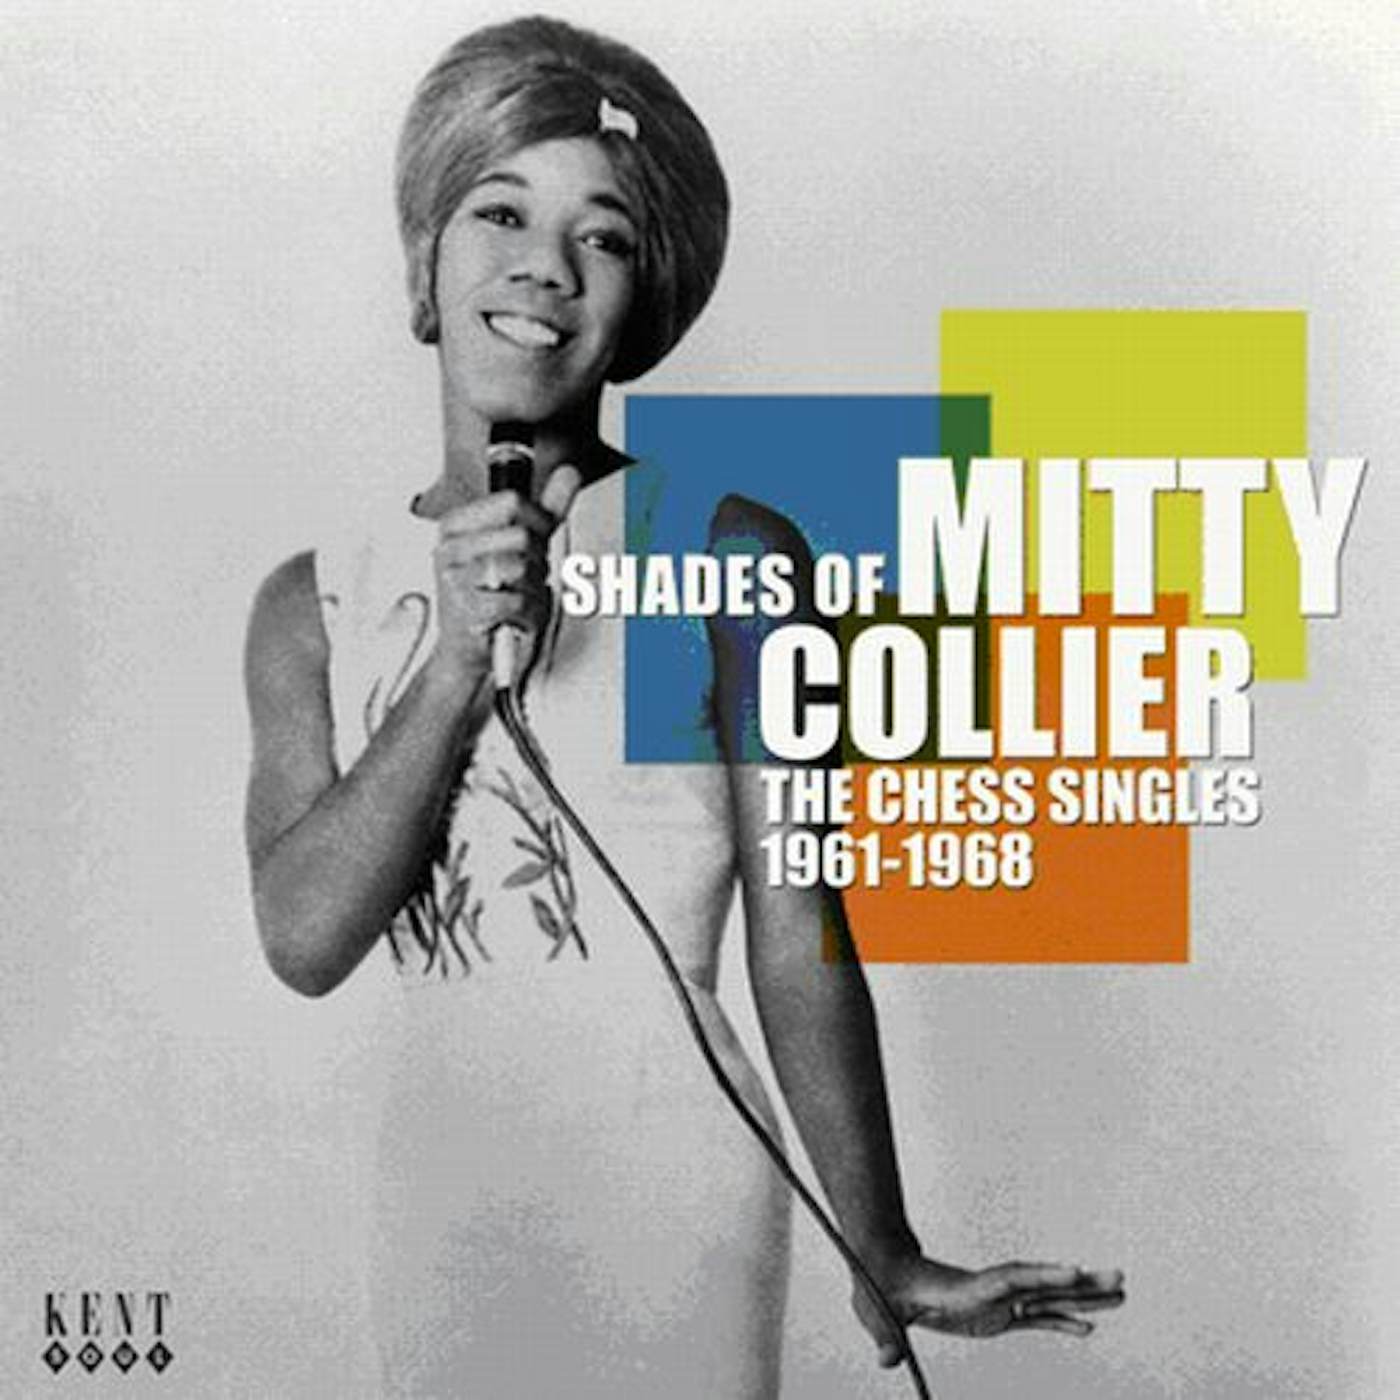 Mitty Collier SHADES OF: THE CHESS SINGLES 1961-1968 CD